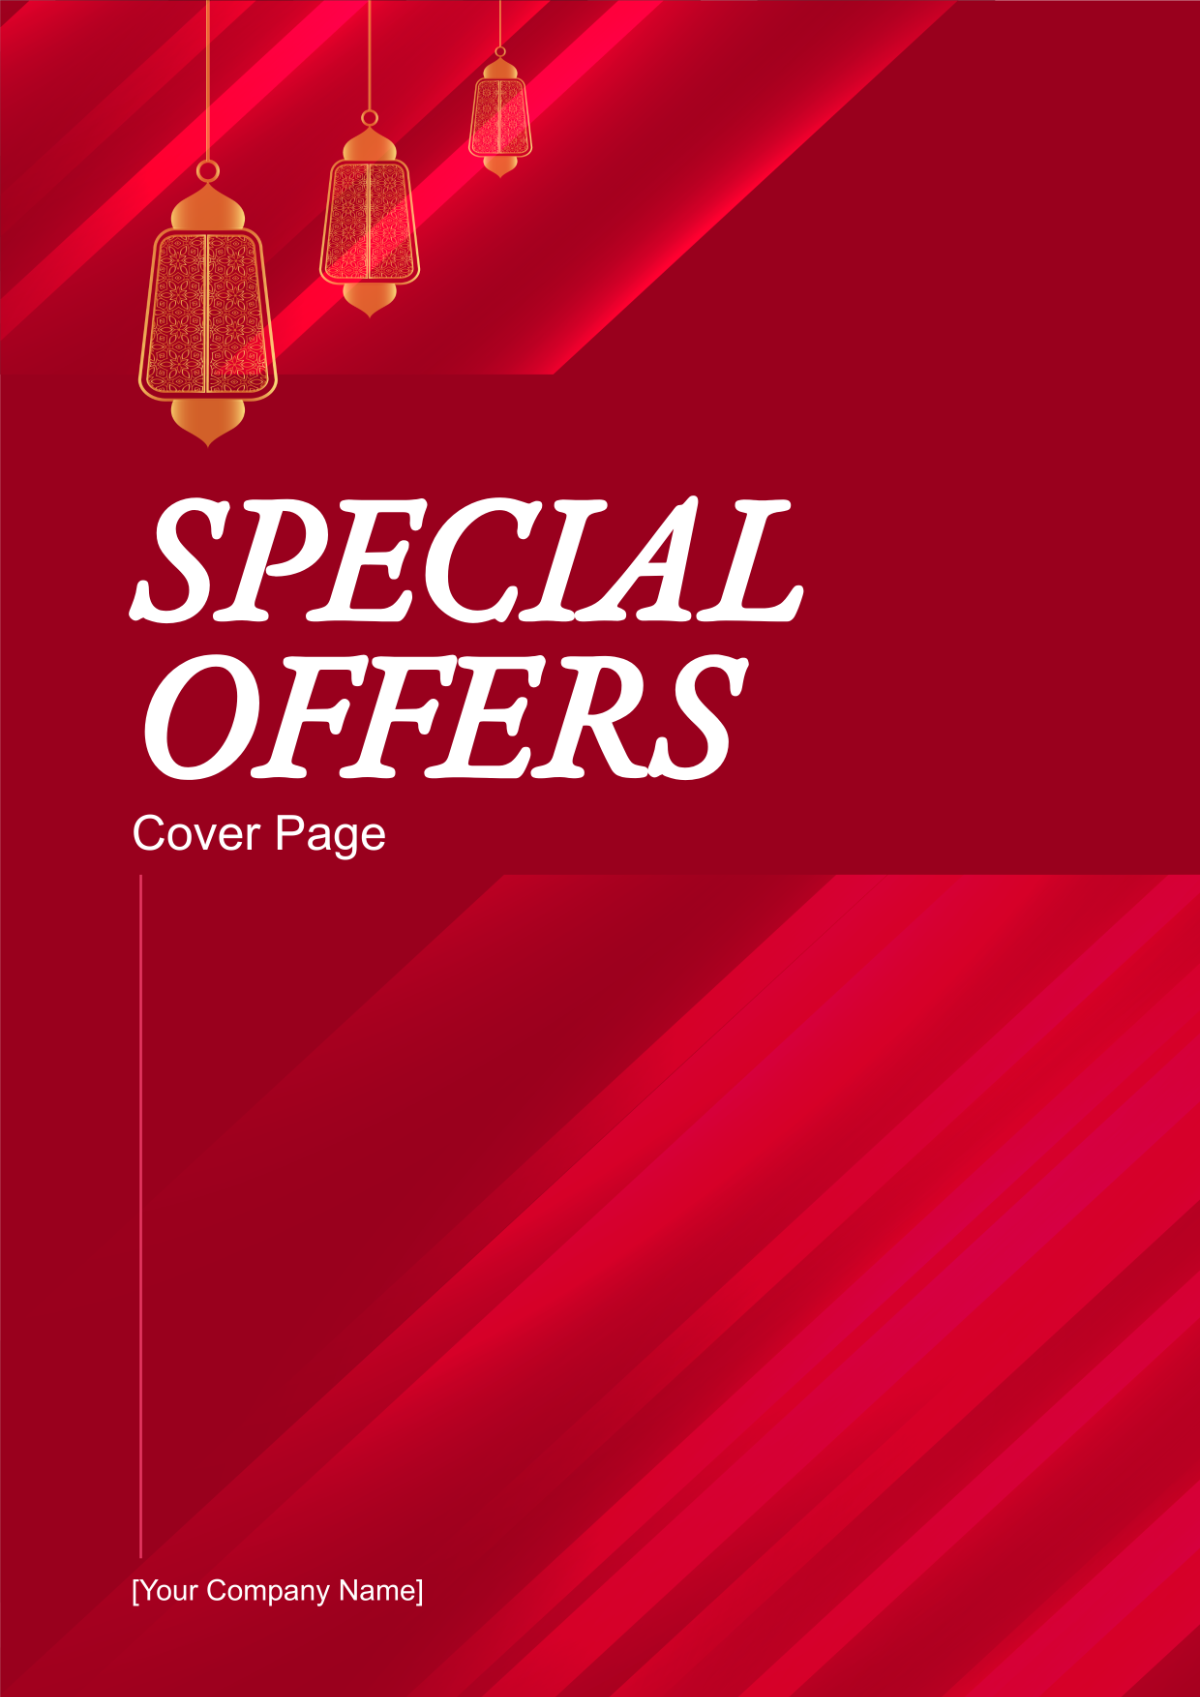 Special Offers Cover Page